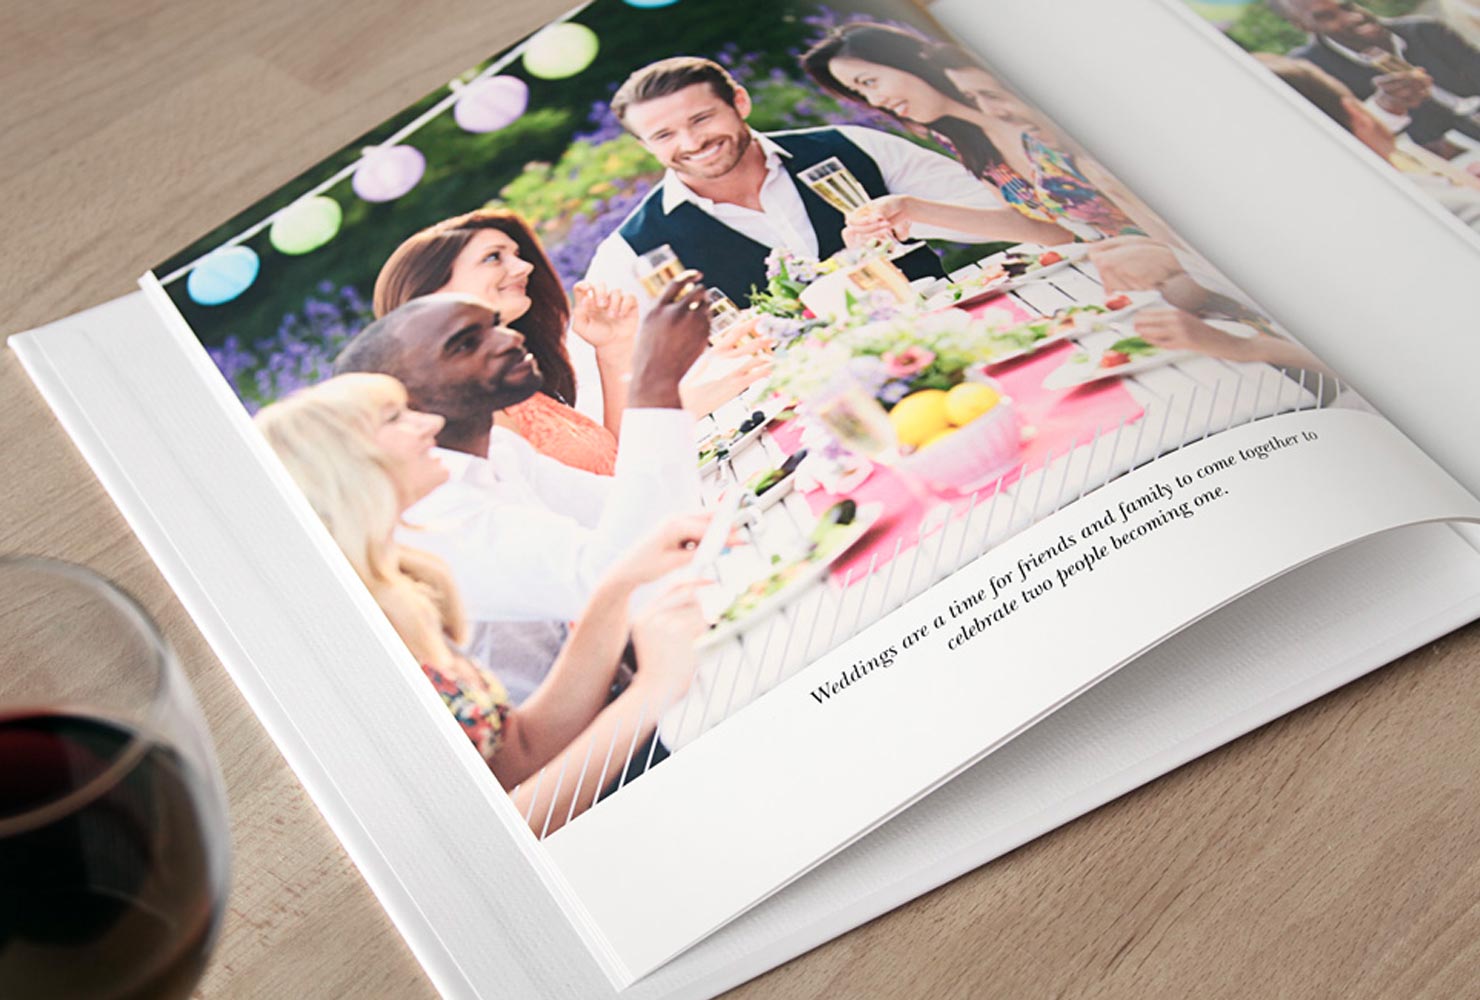 create your own wedding photo books with personalized design